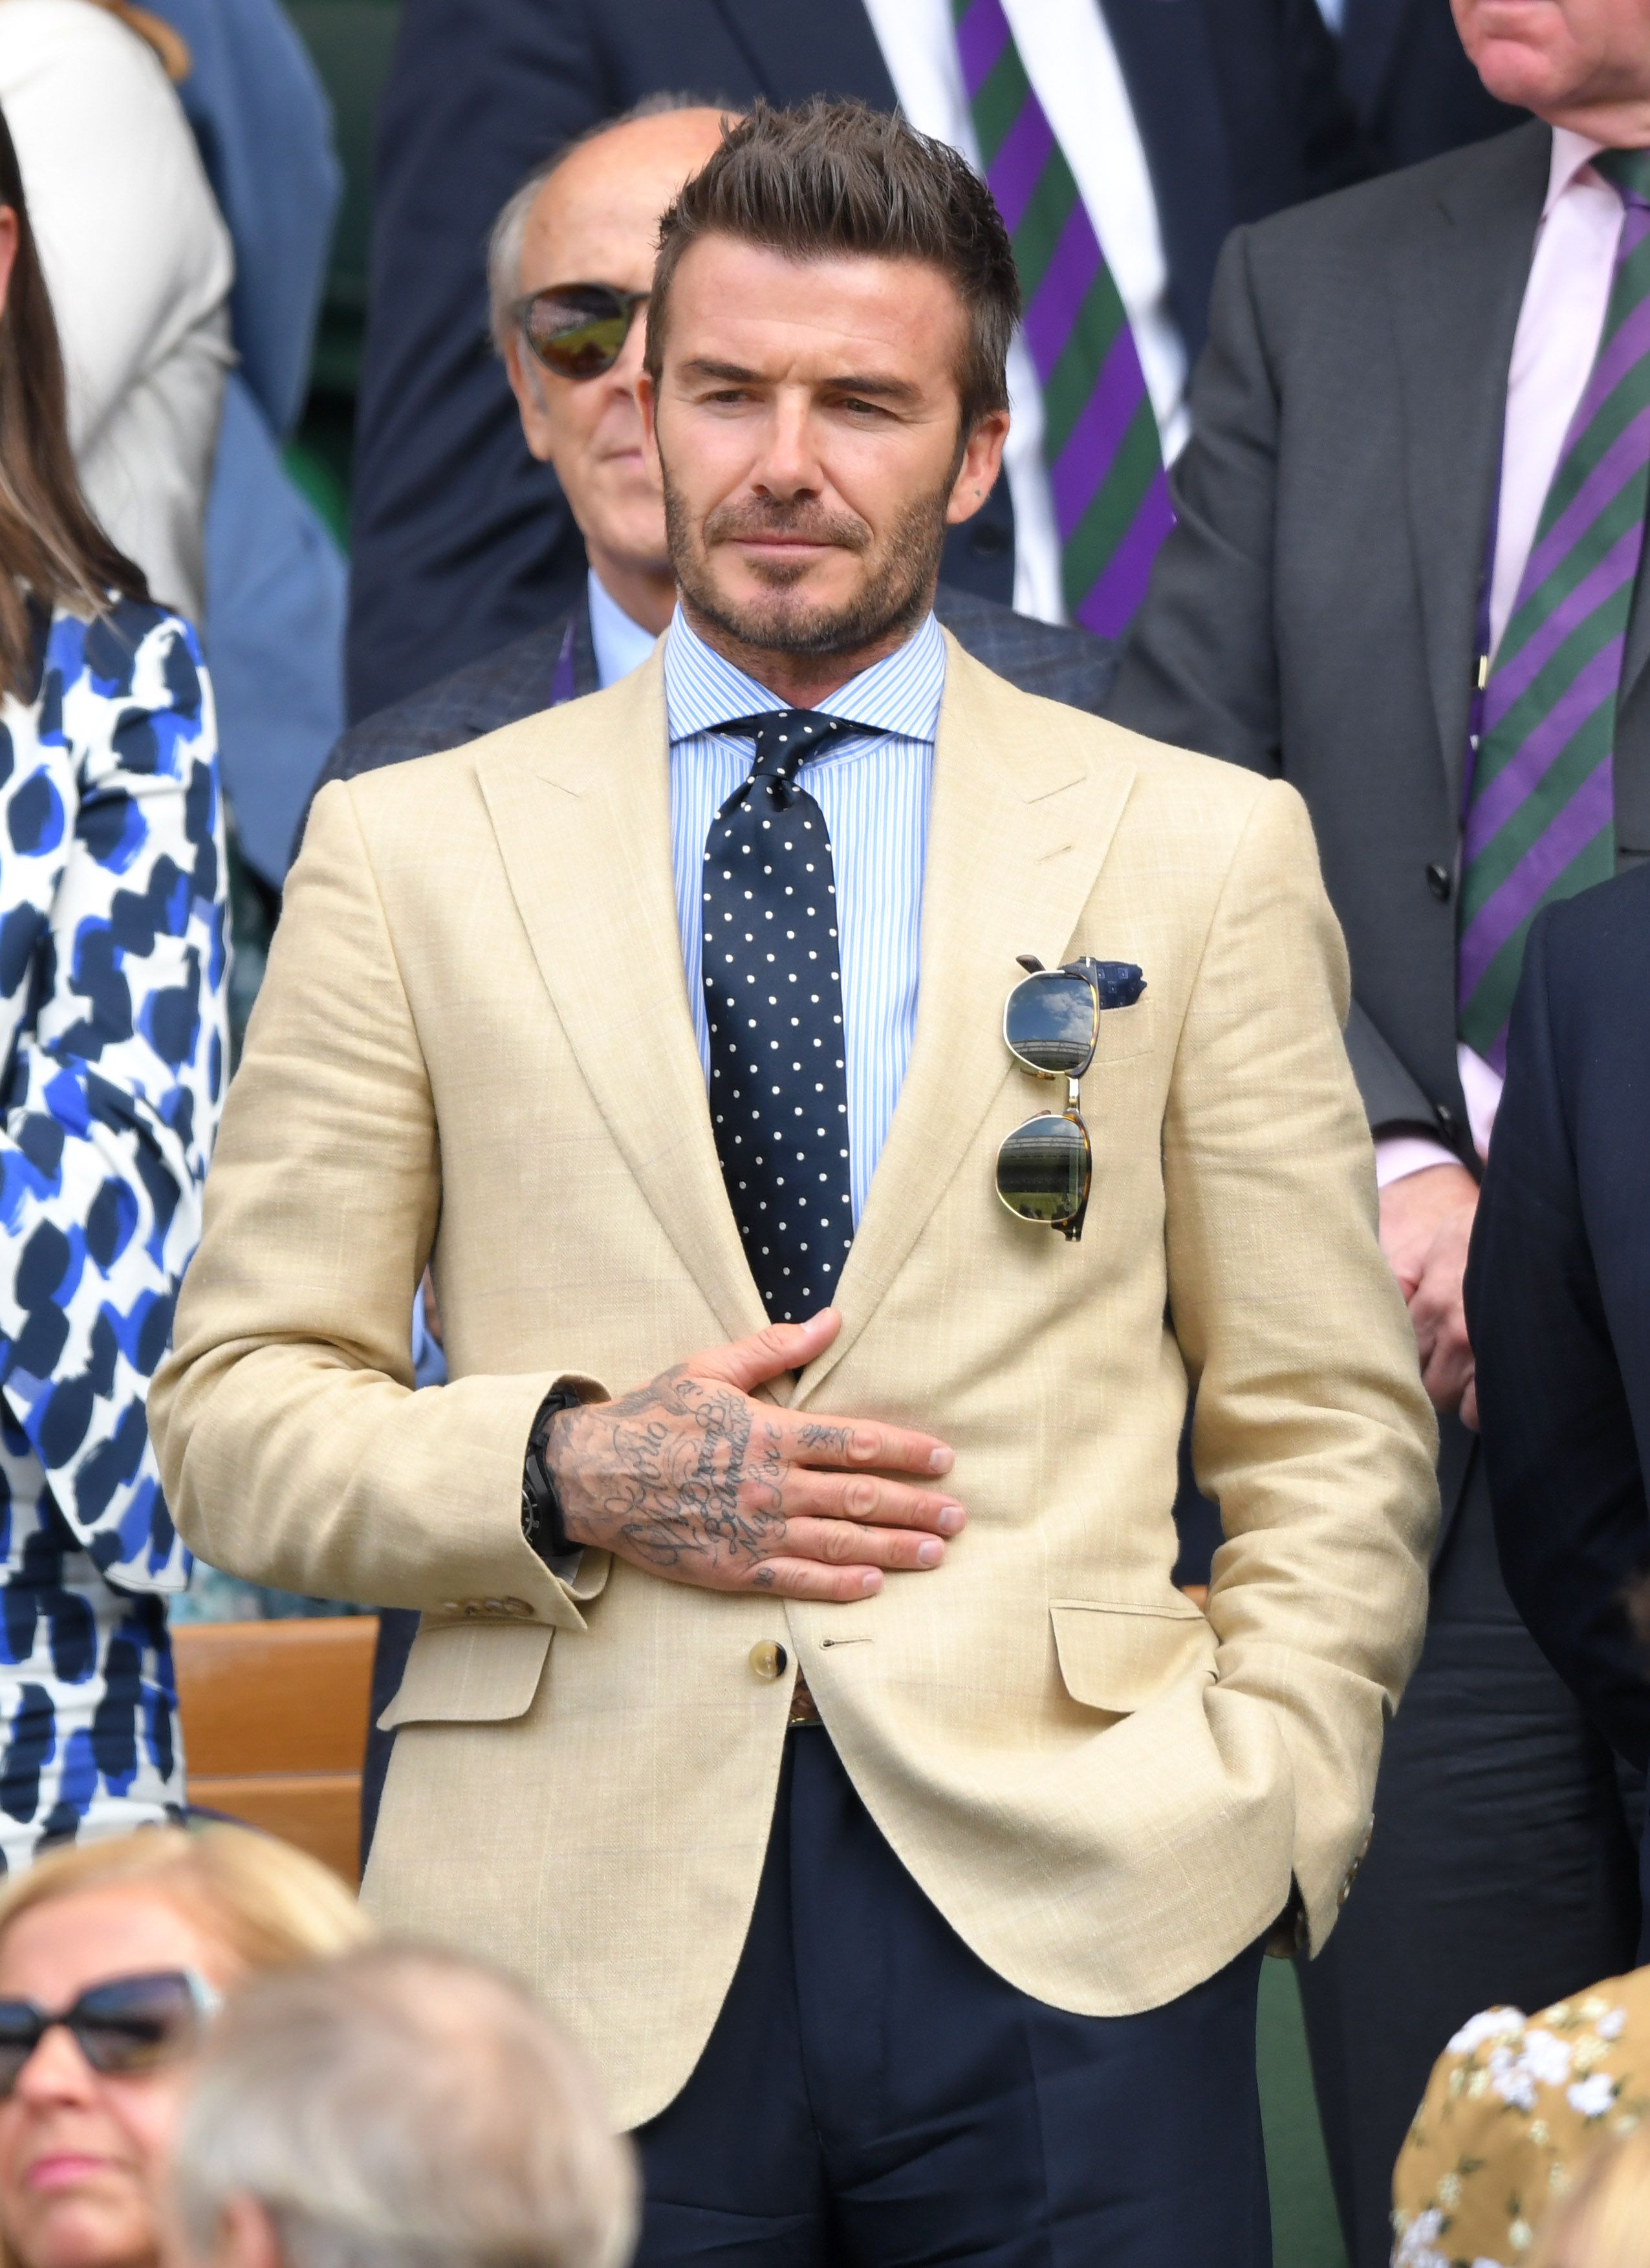 How to Get Every David Beckham Haircut